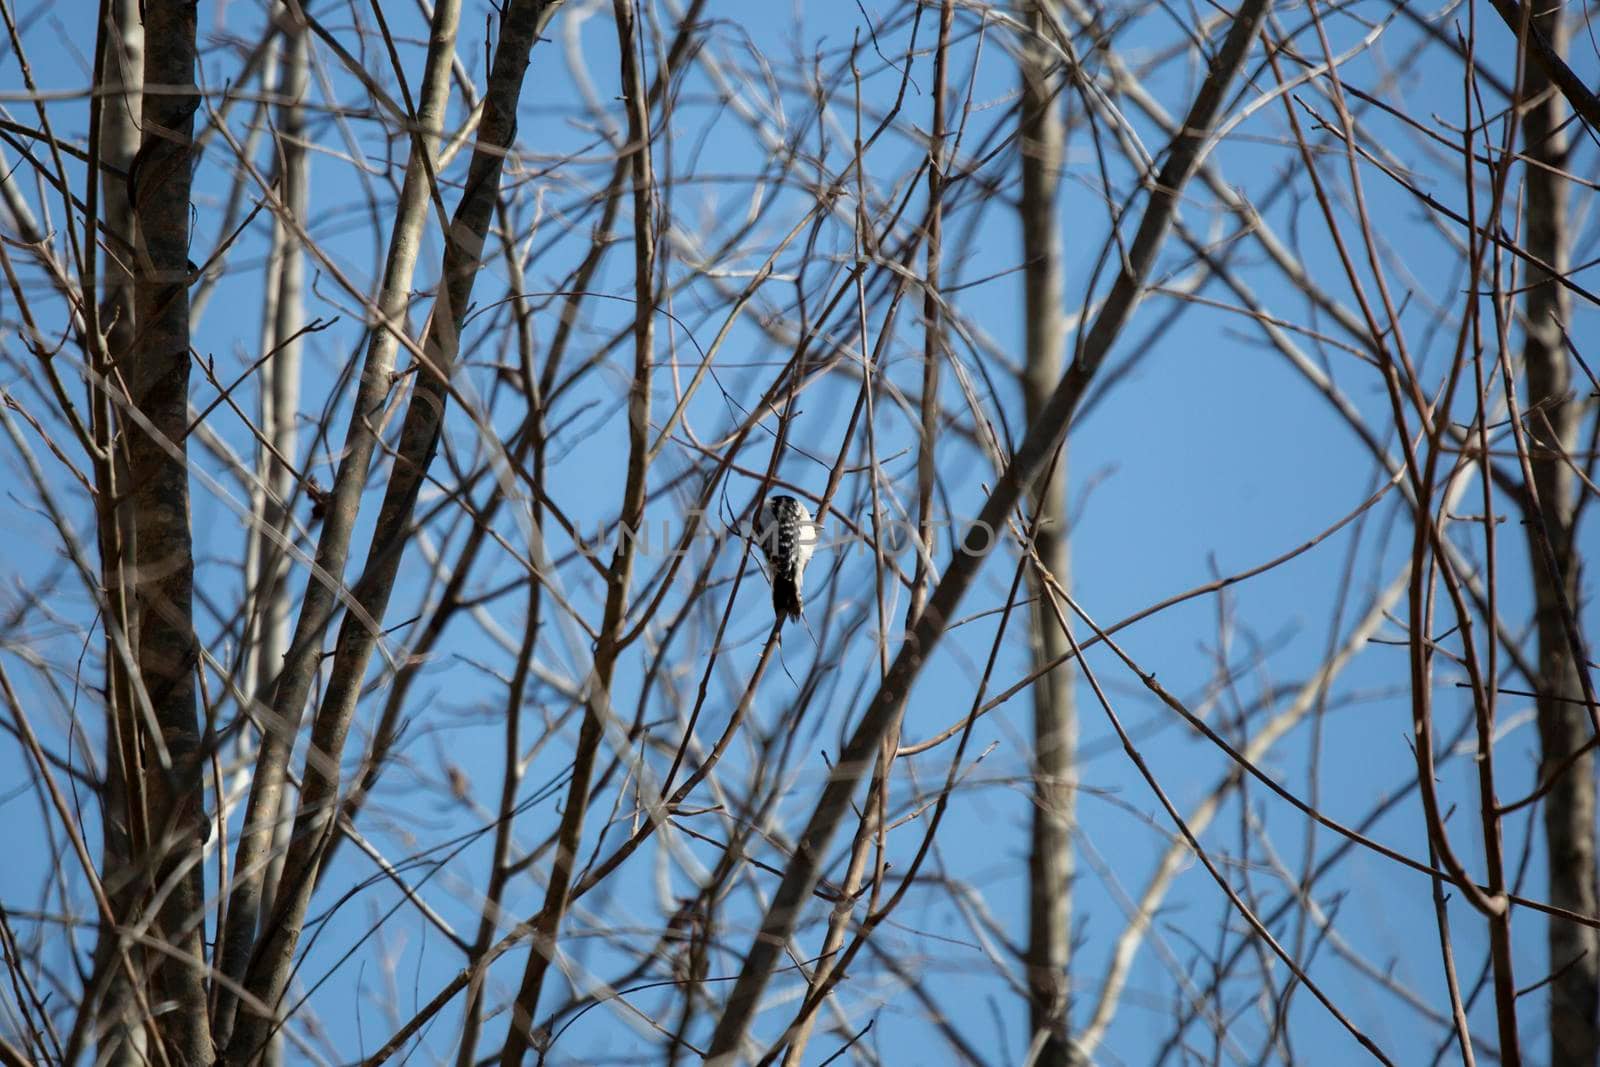 Downy woodpecker (Picoides pubescens) foraging on a branch